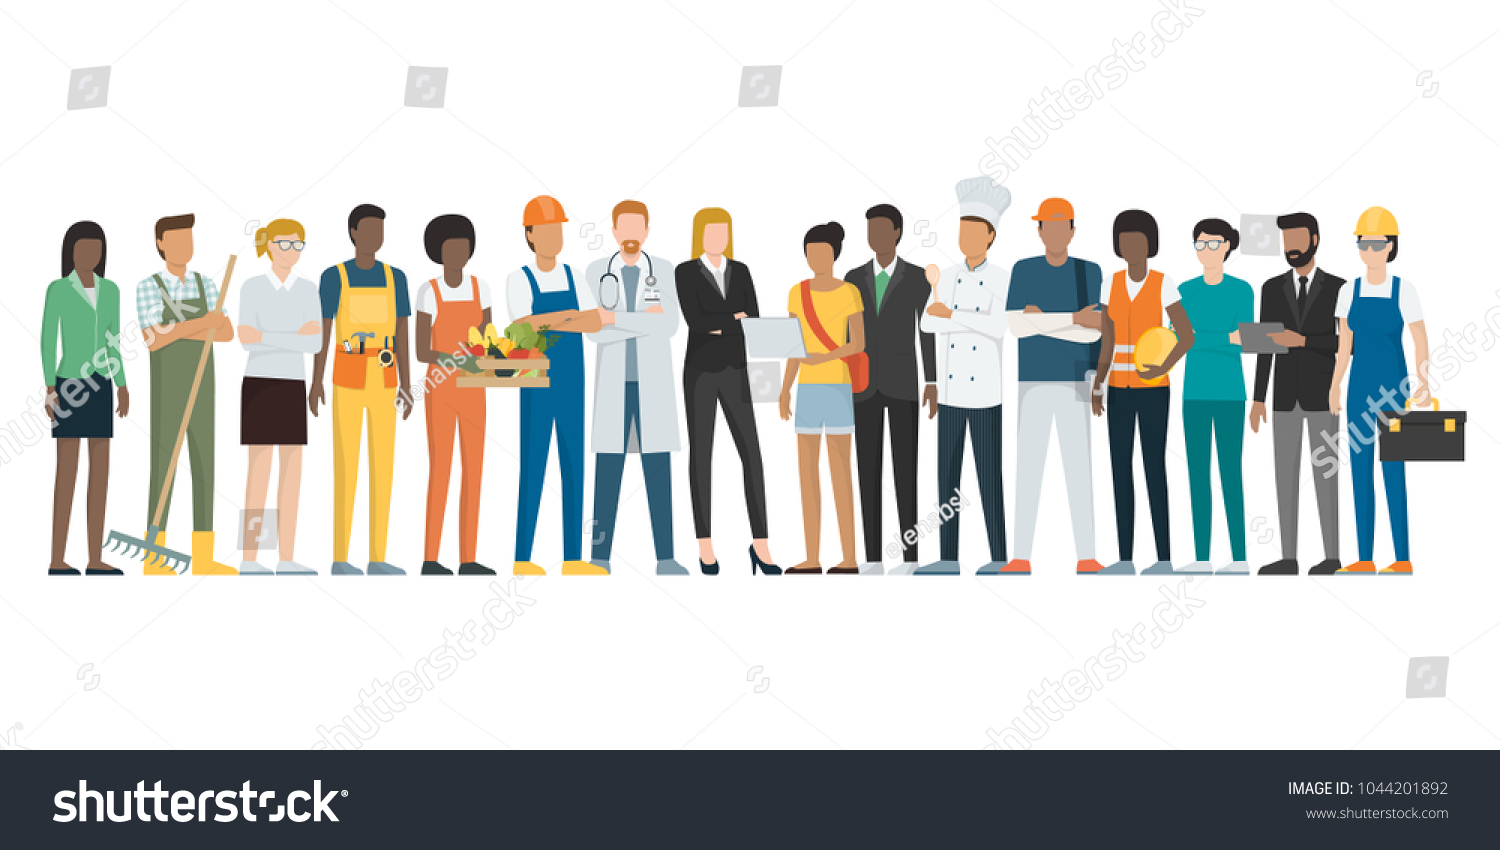 Professional workers standing together, employment and teamwork concept #1044201892